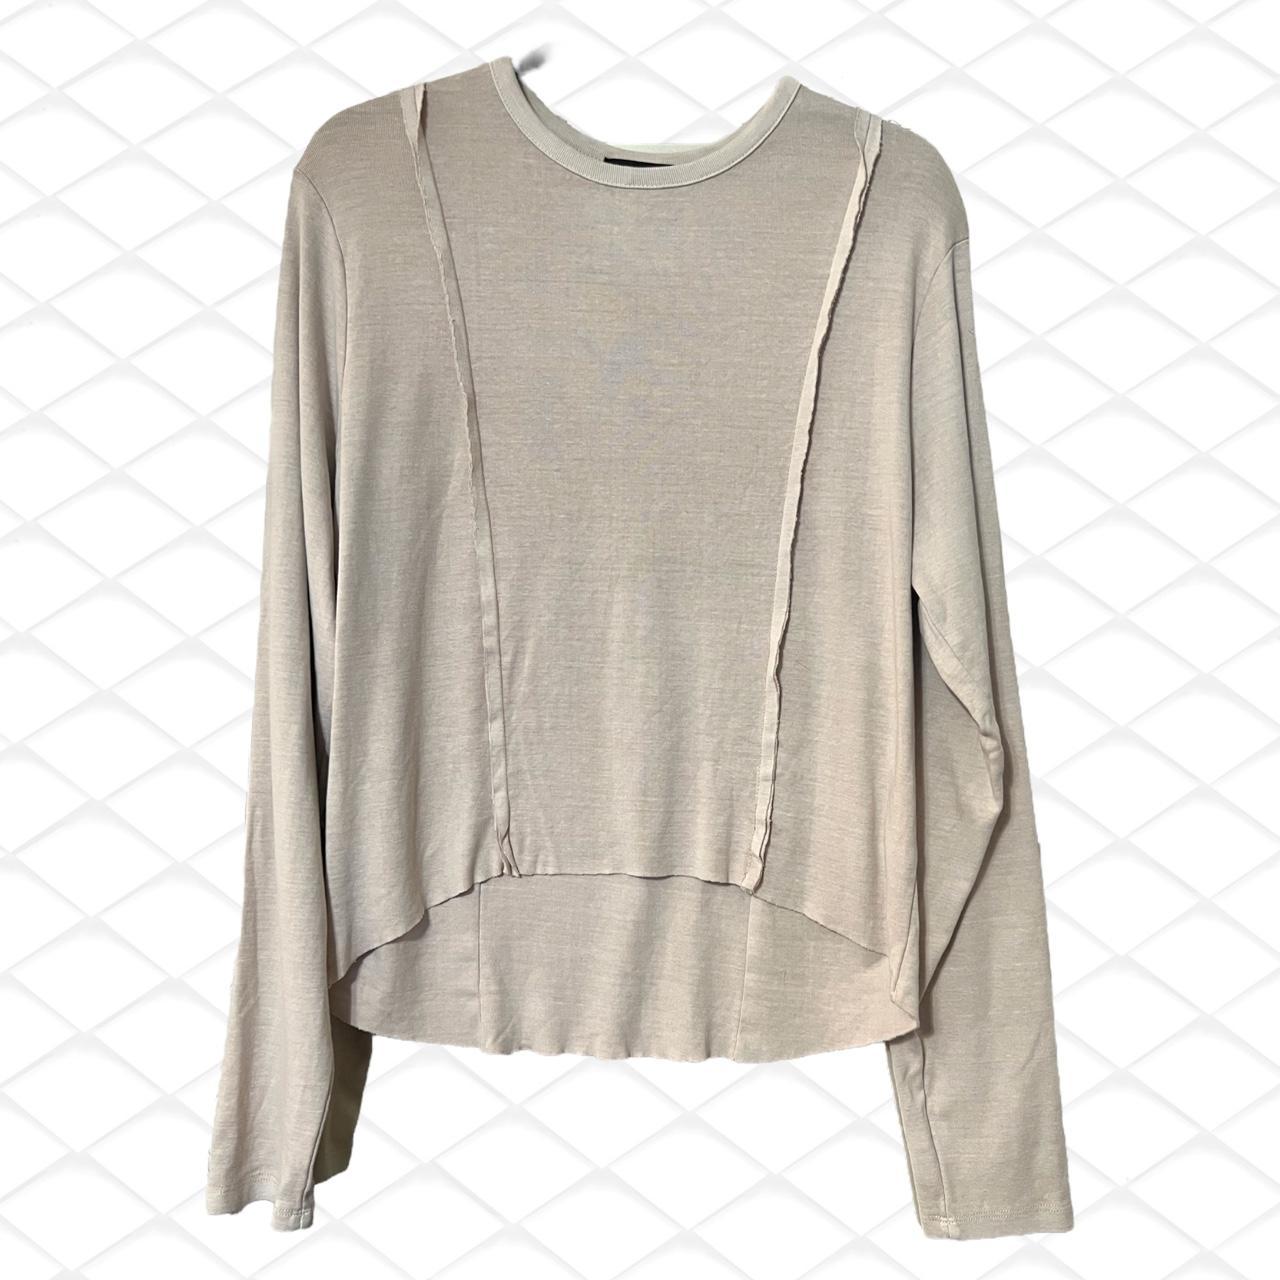 Product Image 1 - Long Sleeve light nude top.